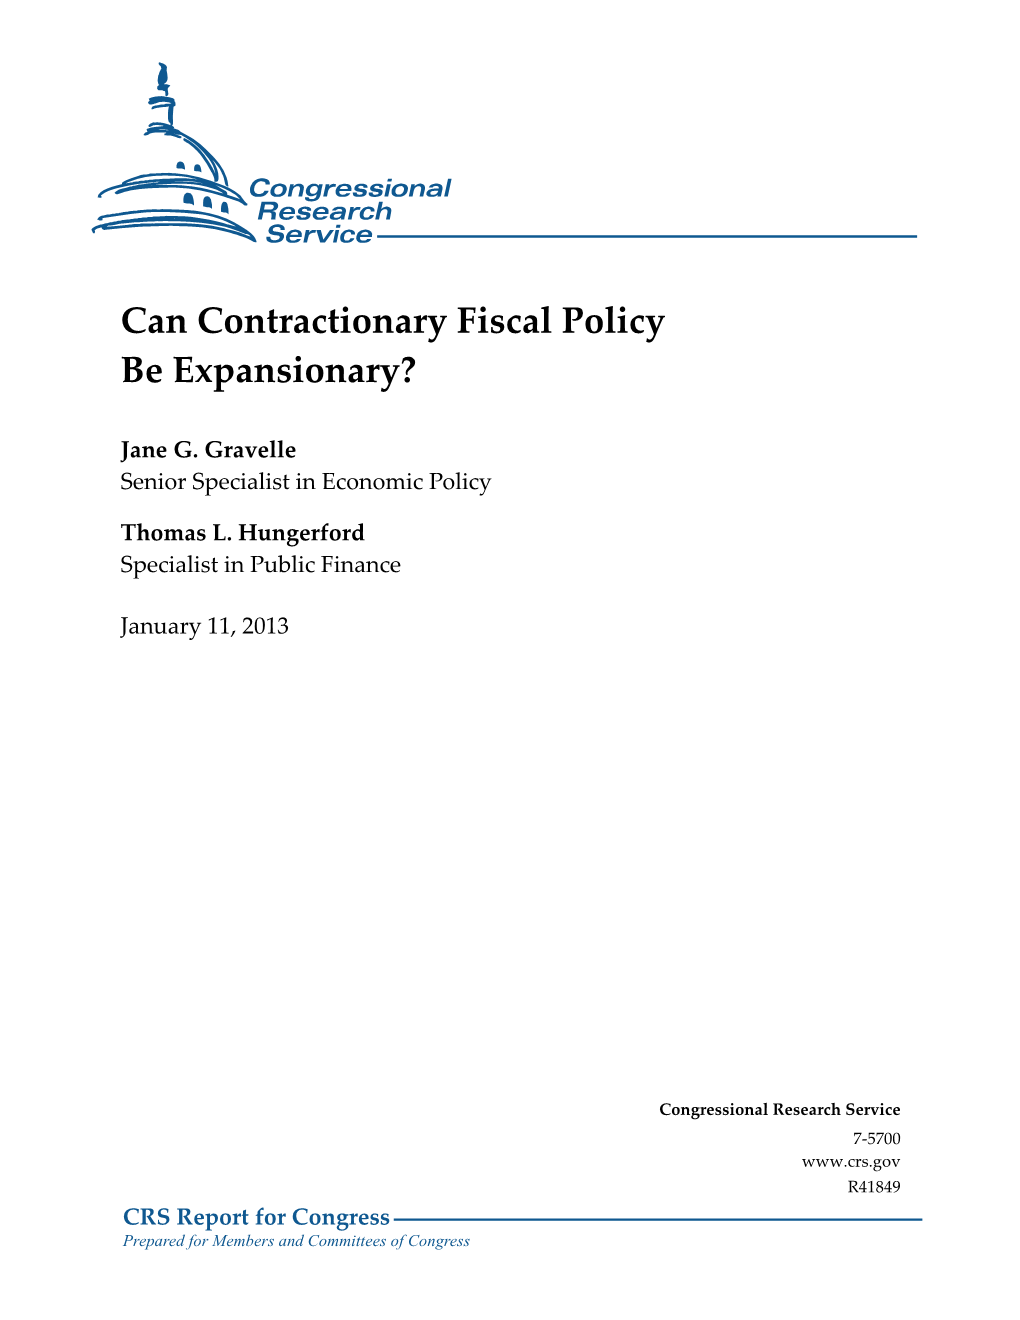 Can Contractionary Fiscal Policy Be Expansionary?